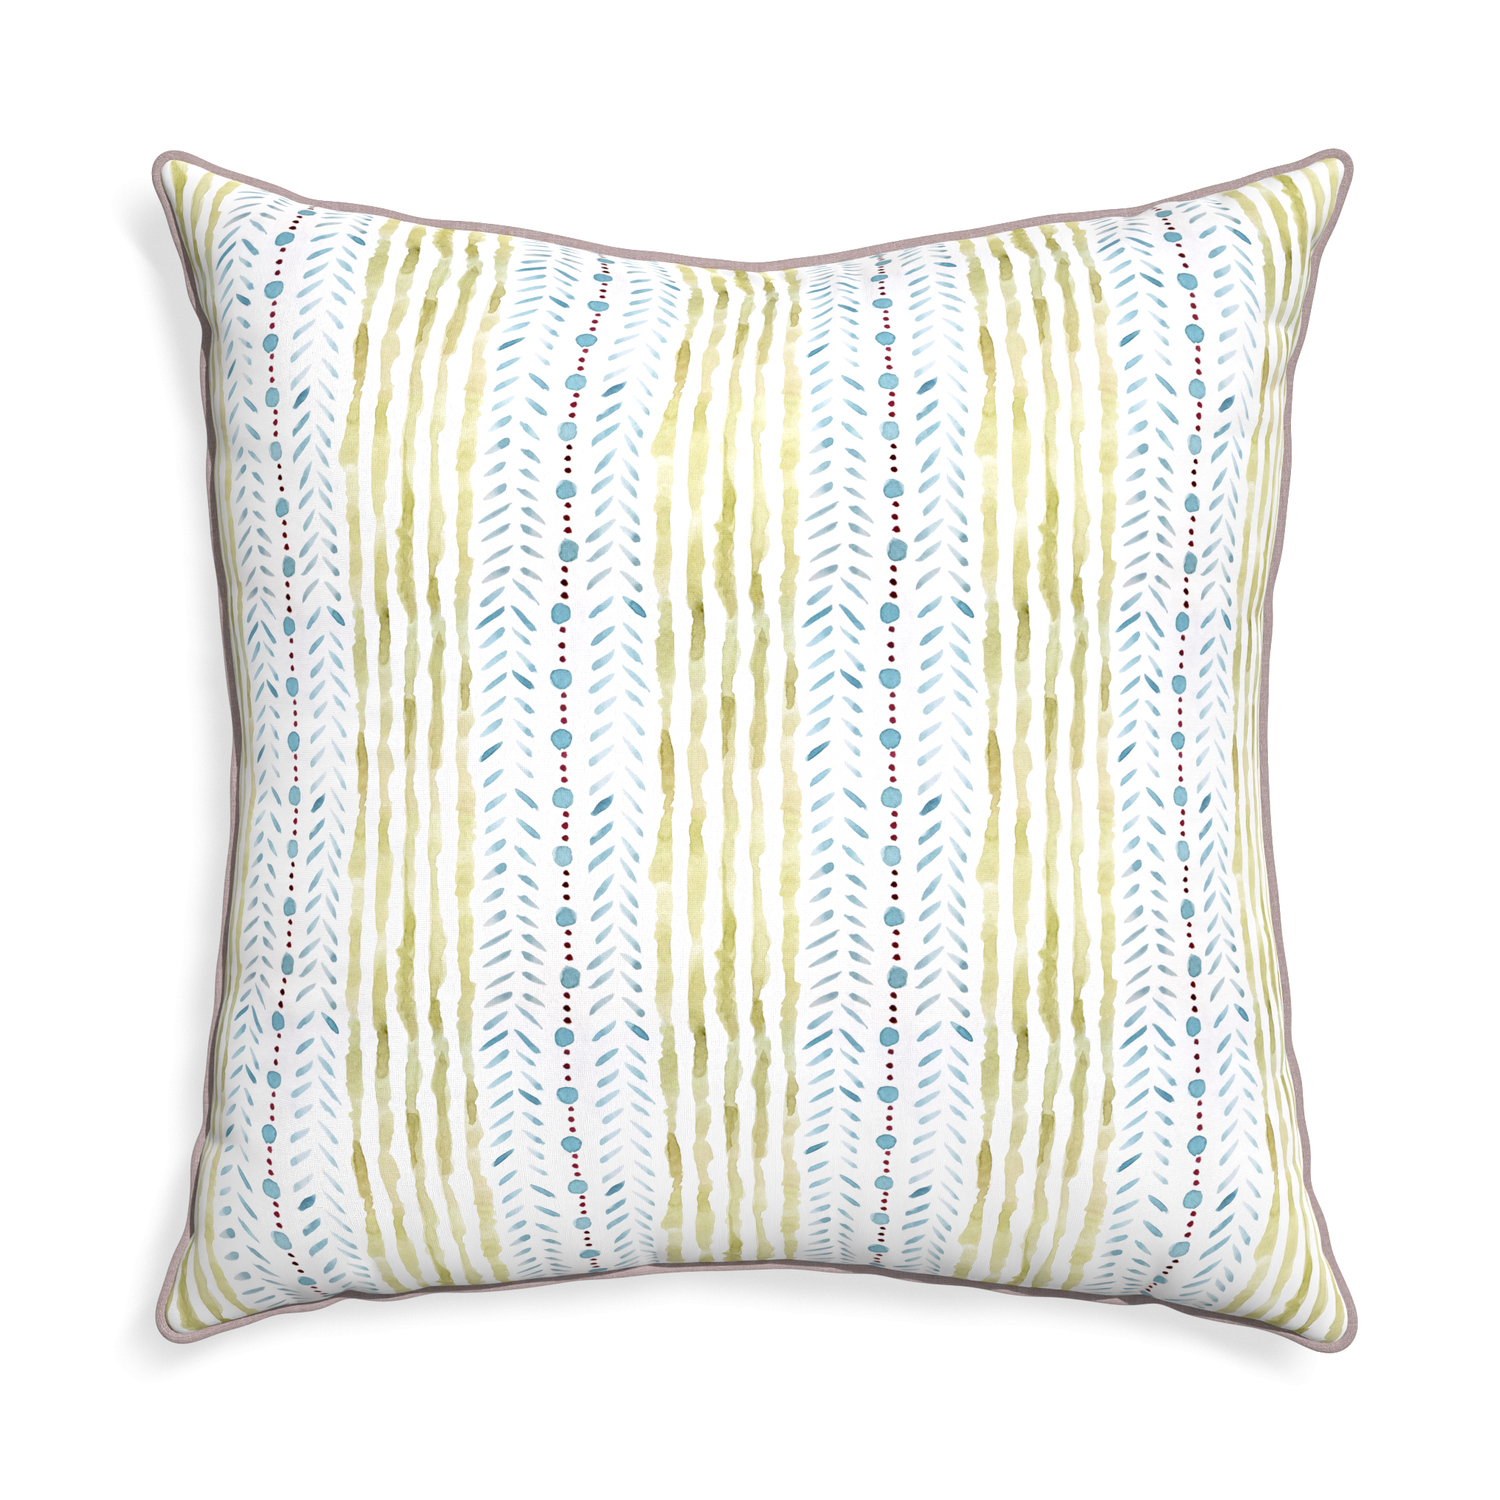 Euro-sham julia custom blue & green stripedpillow with orchid piping on white background